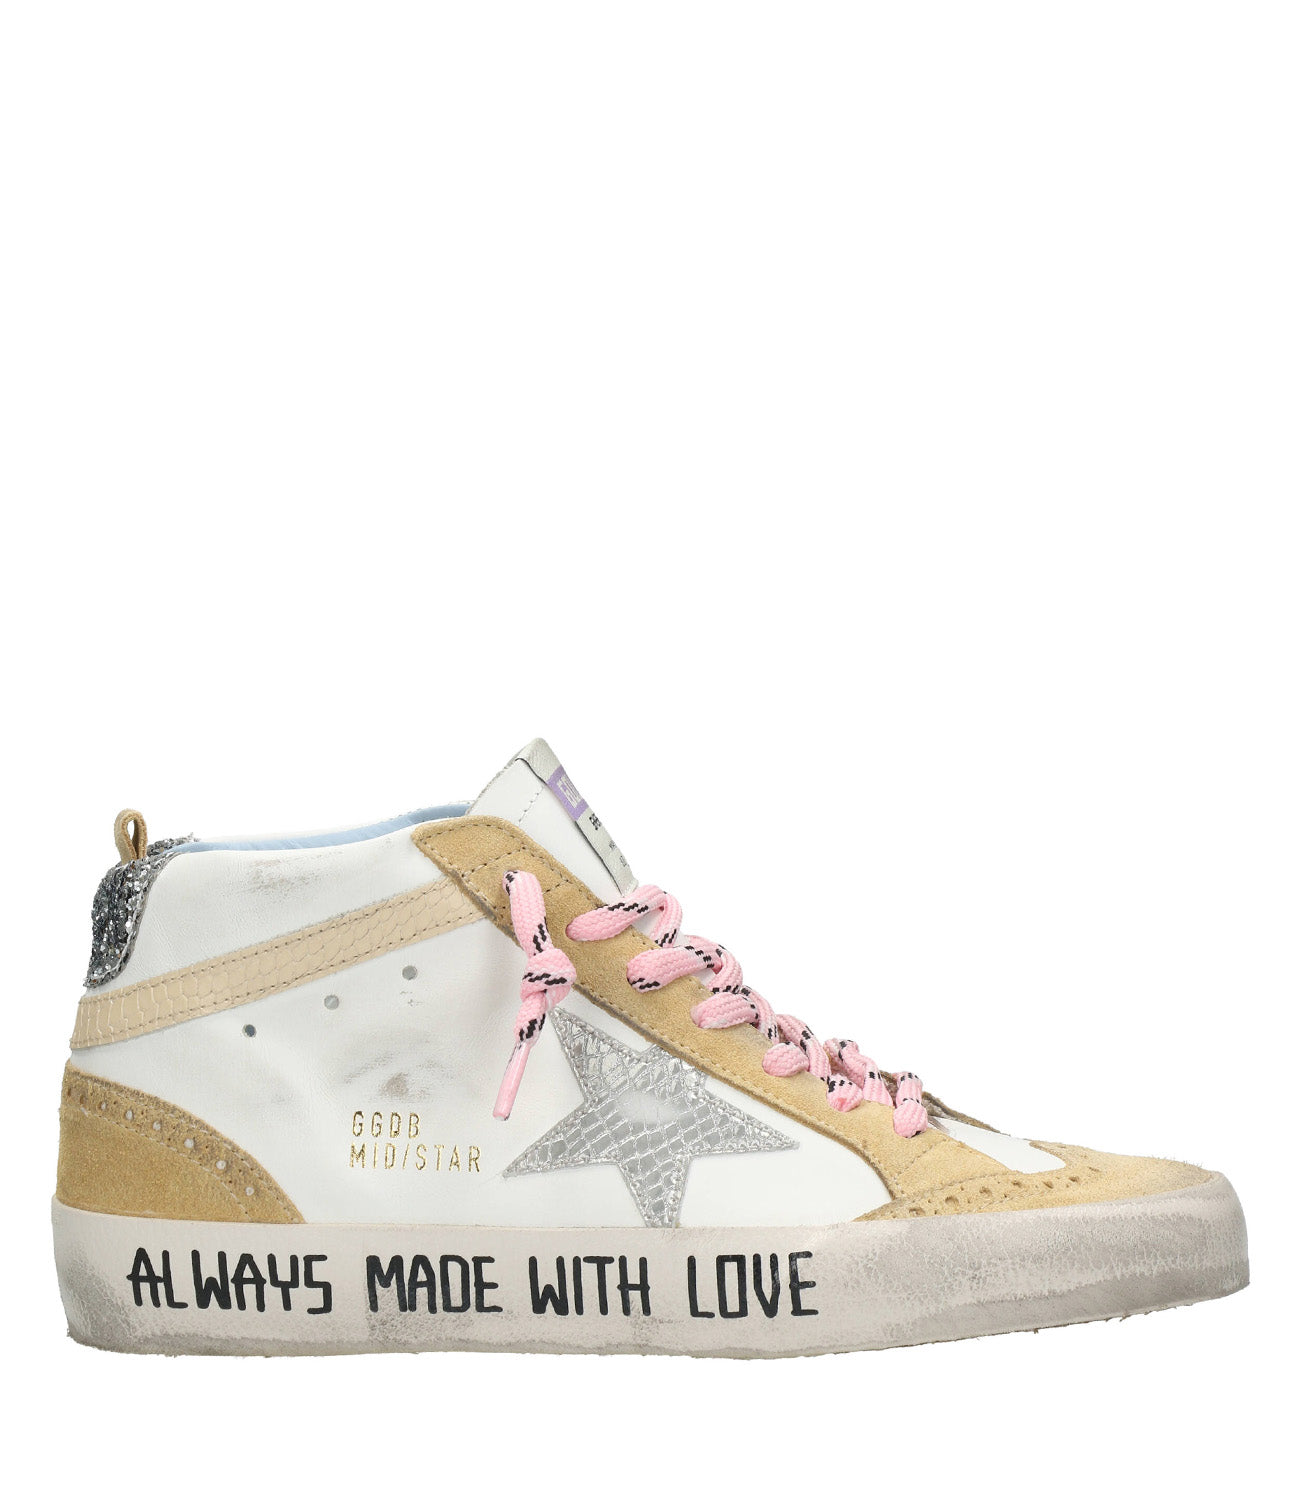 Golden Goose | Mid Star Sneakers White, Sand and Silver